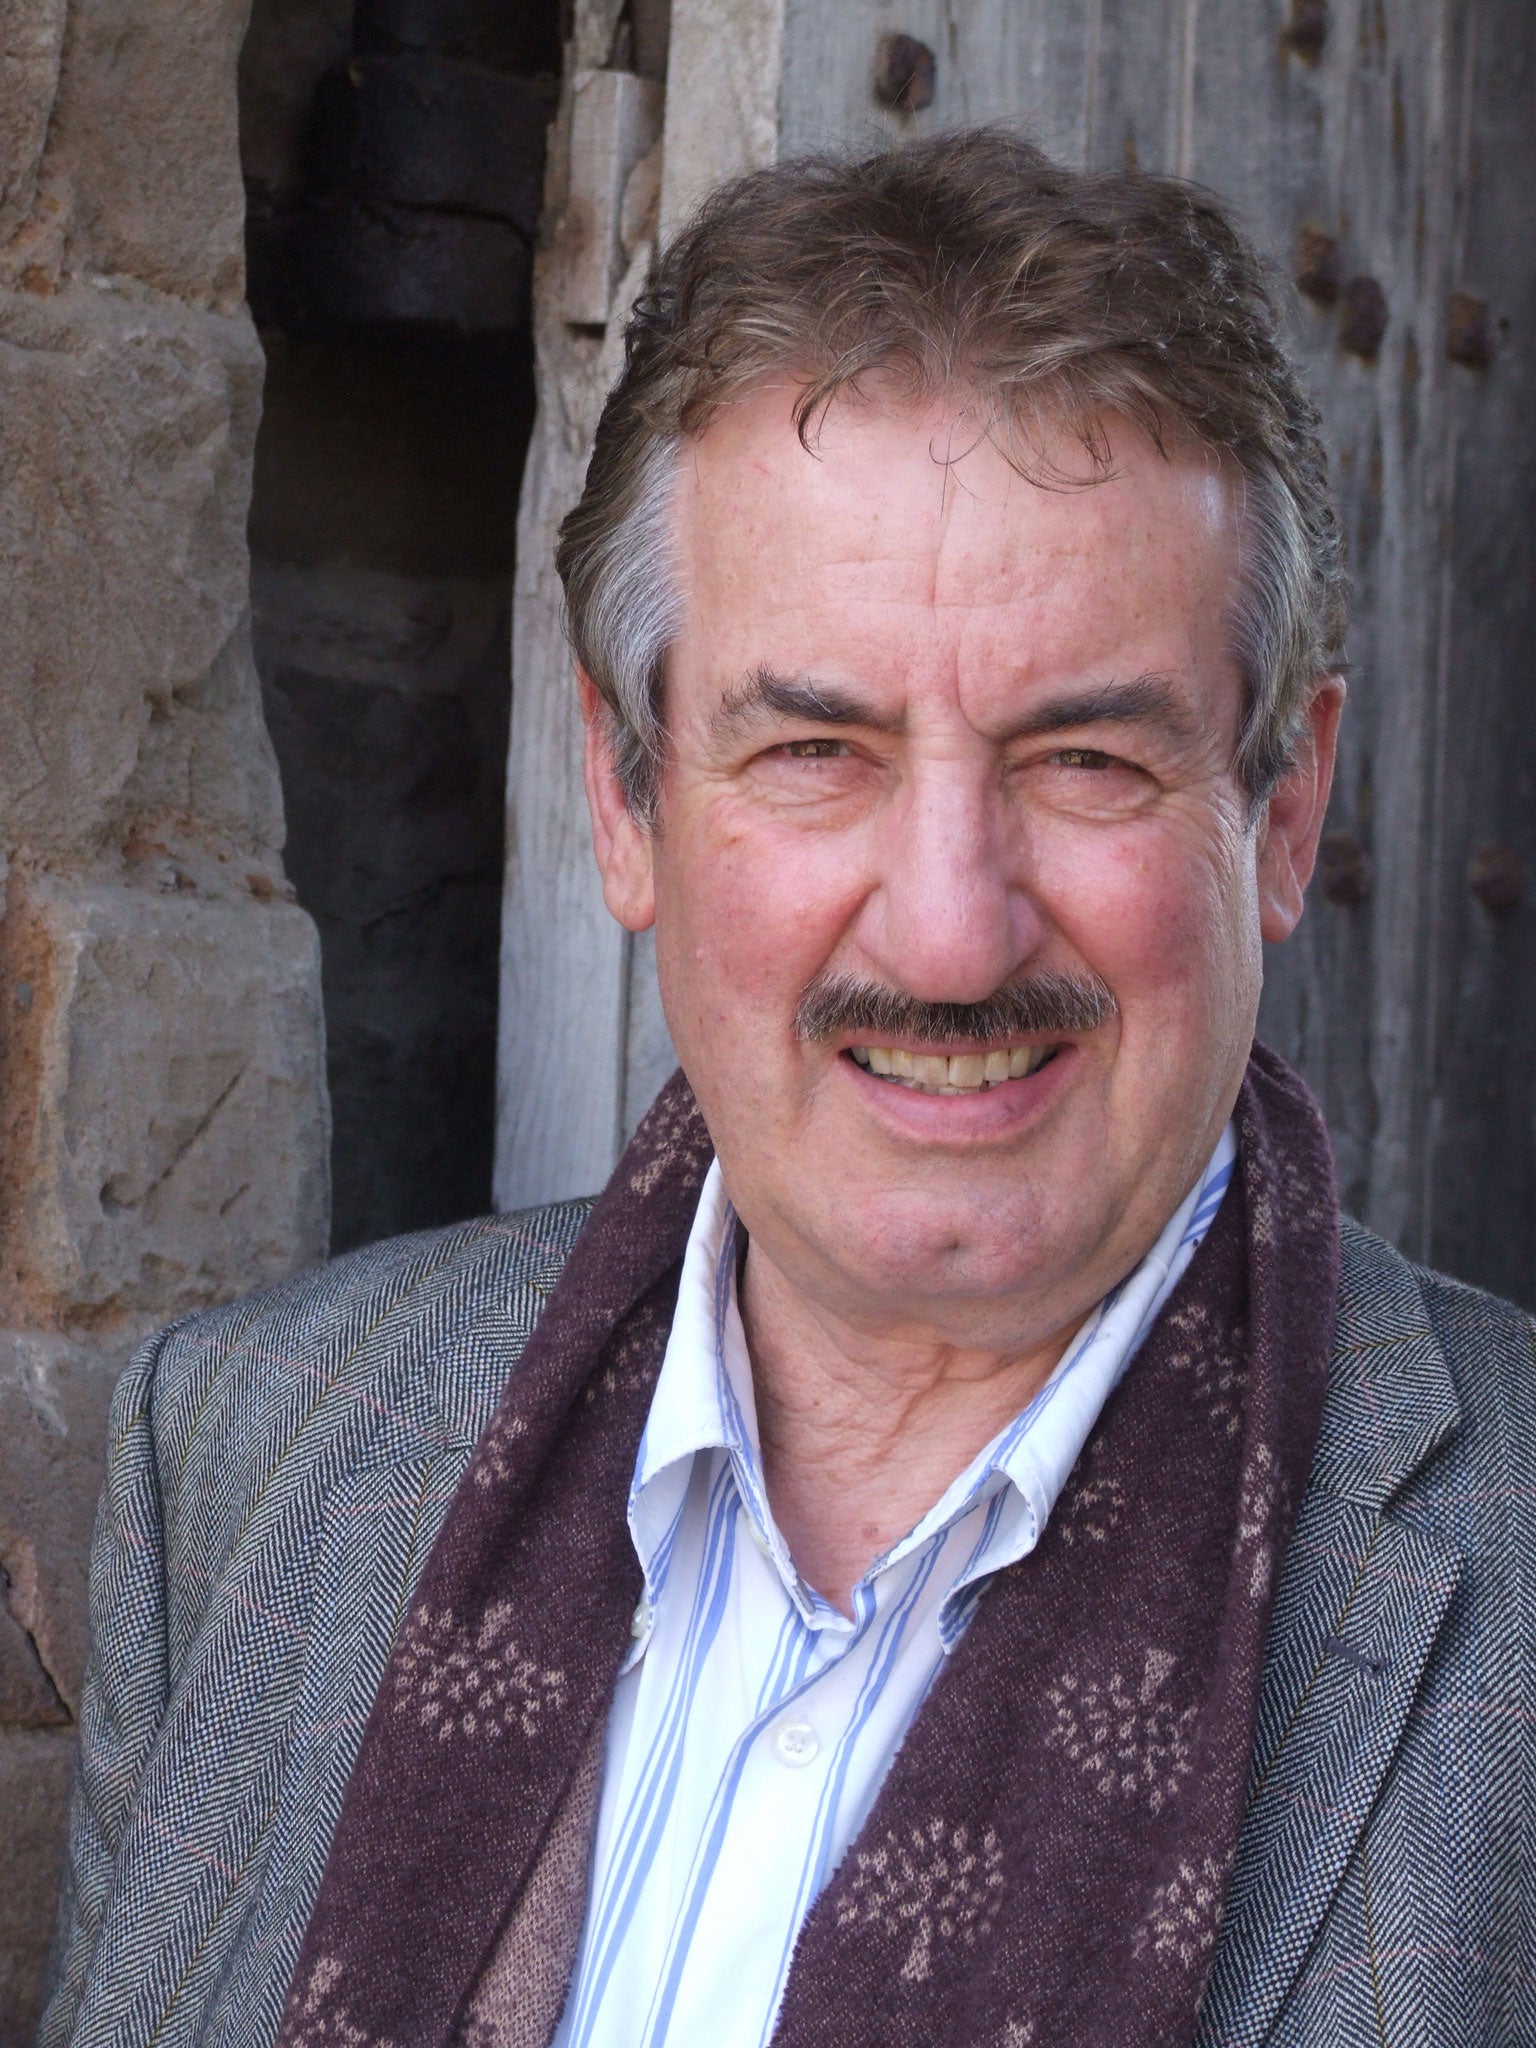 Only Fools and Horses actor John Challis